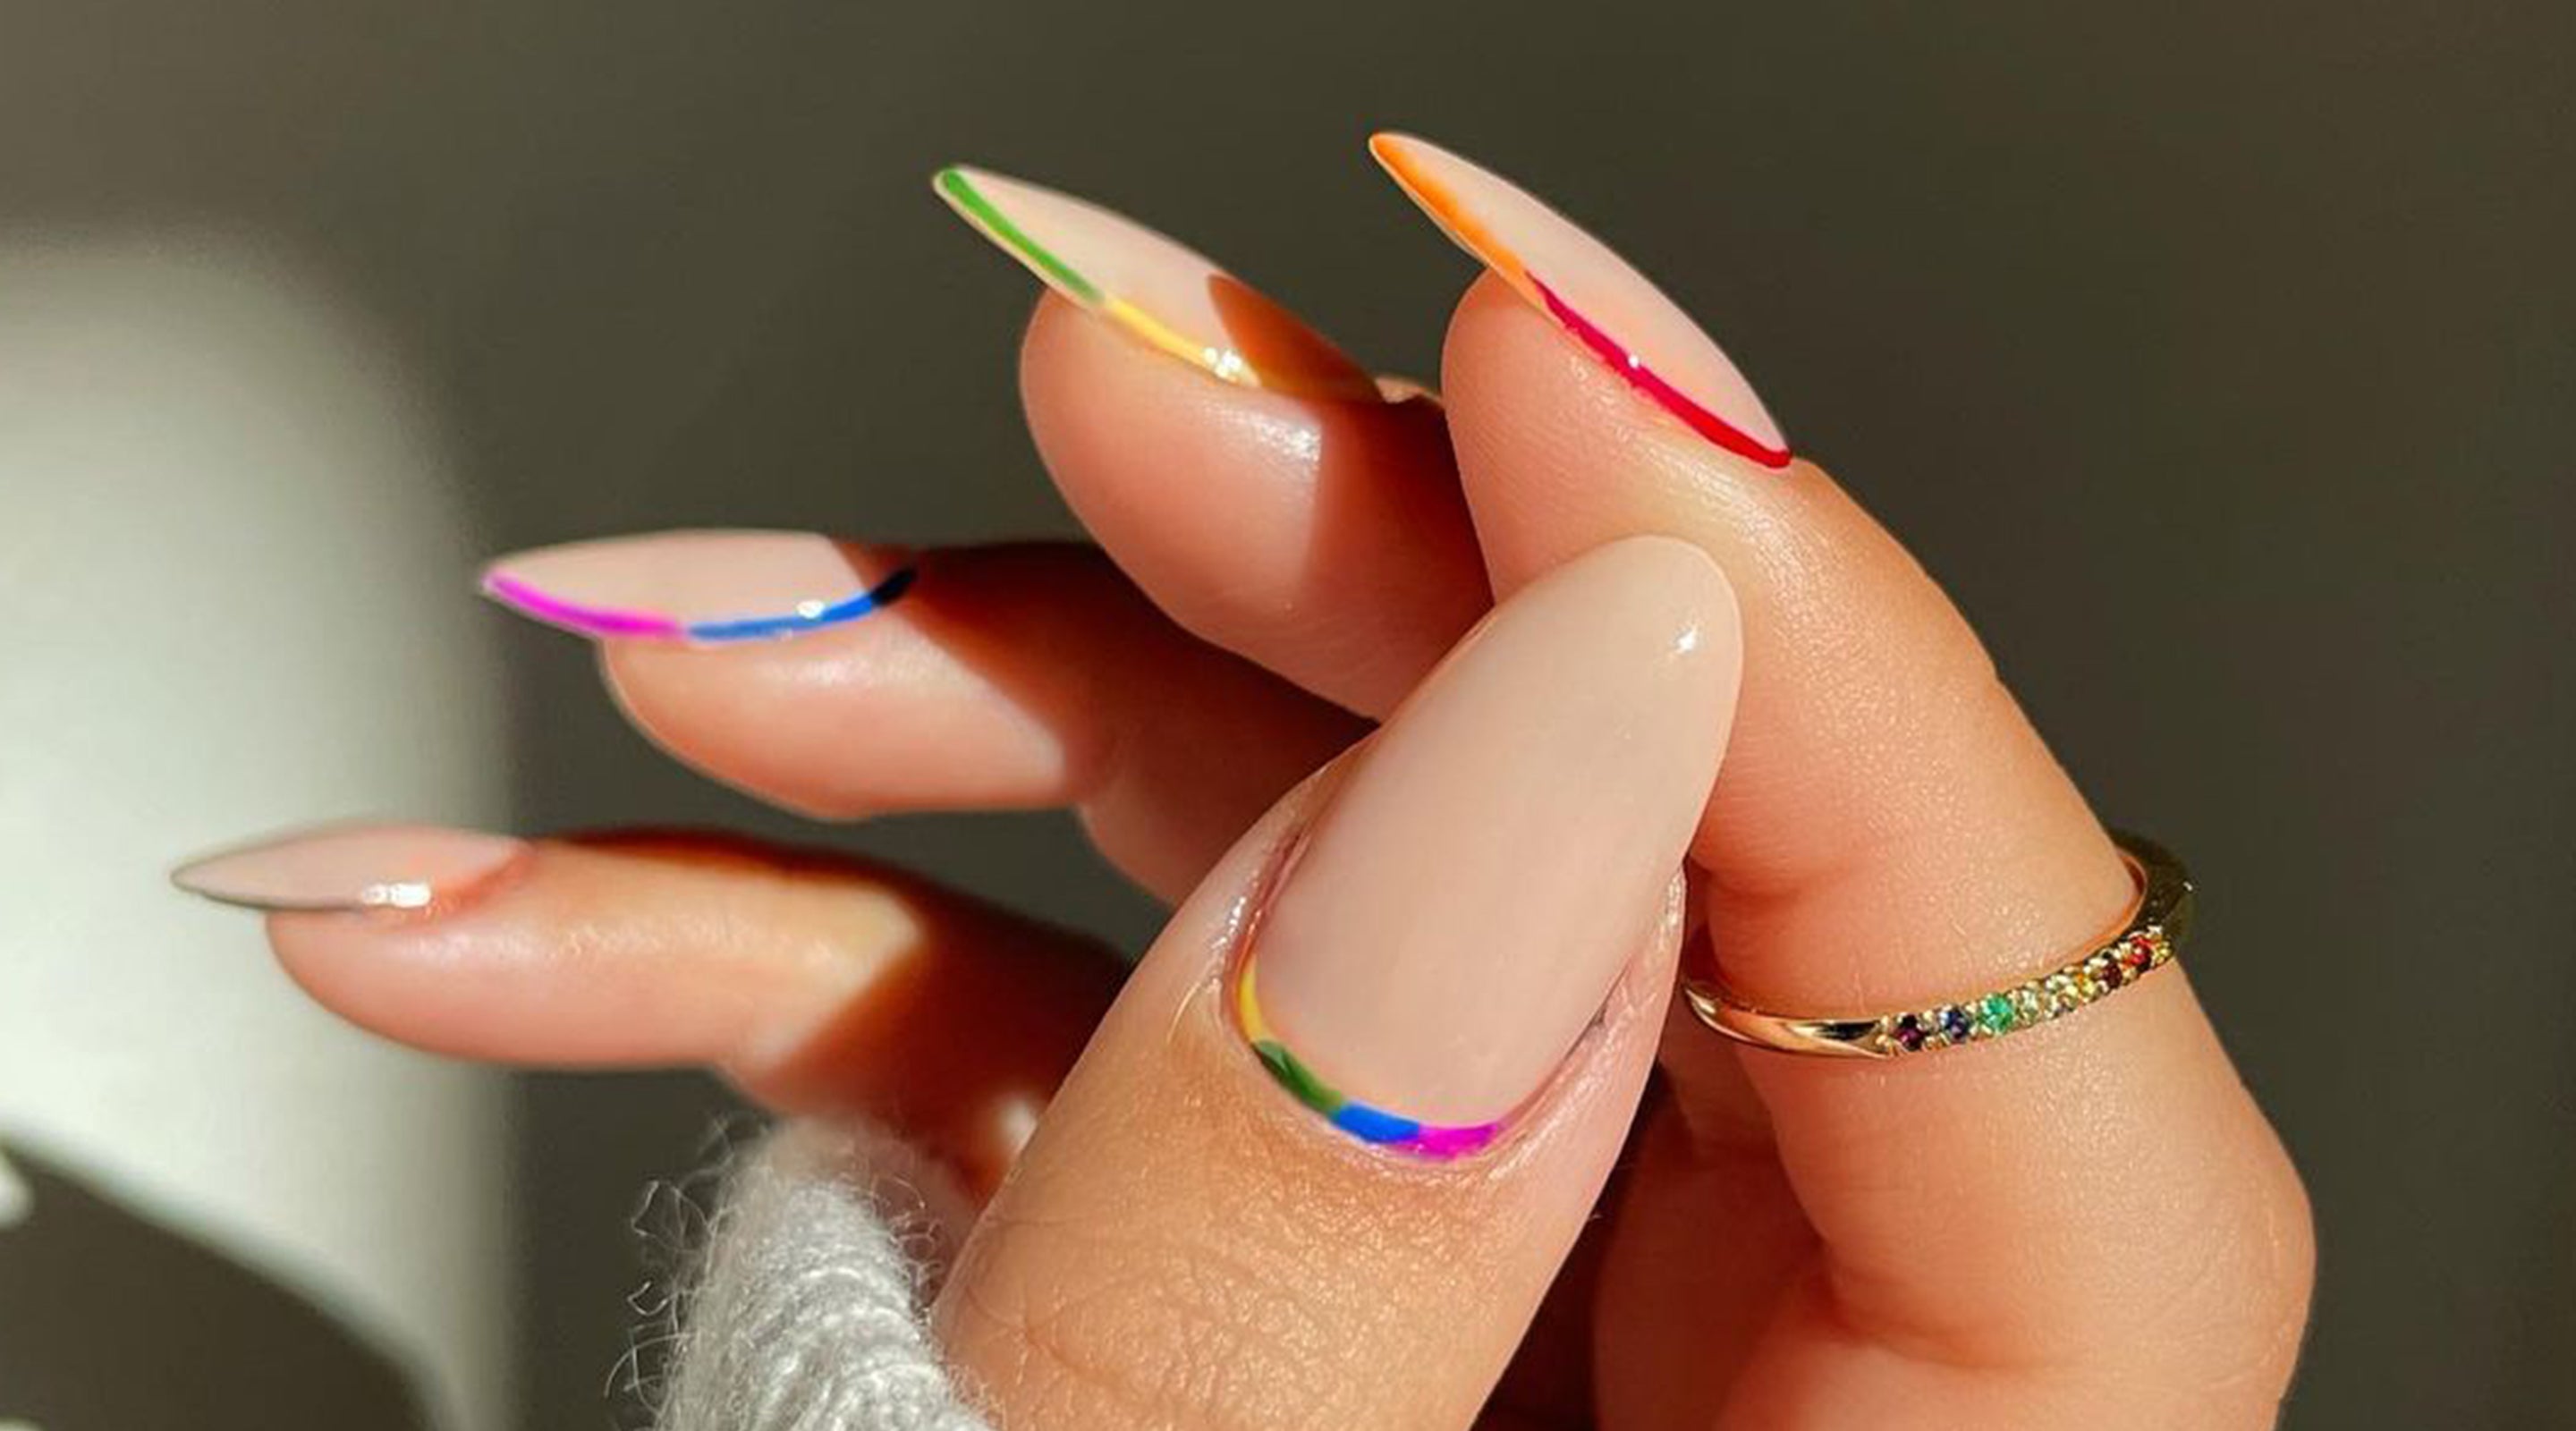 Nail art goes from niche to mainstream - Los Angeles Times